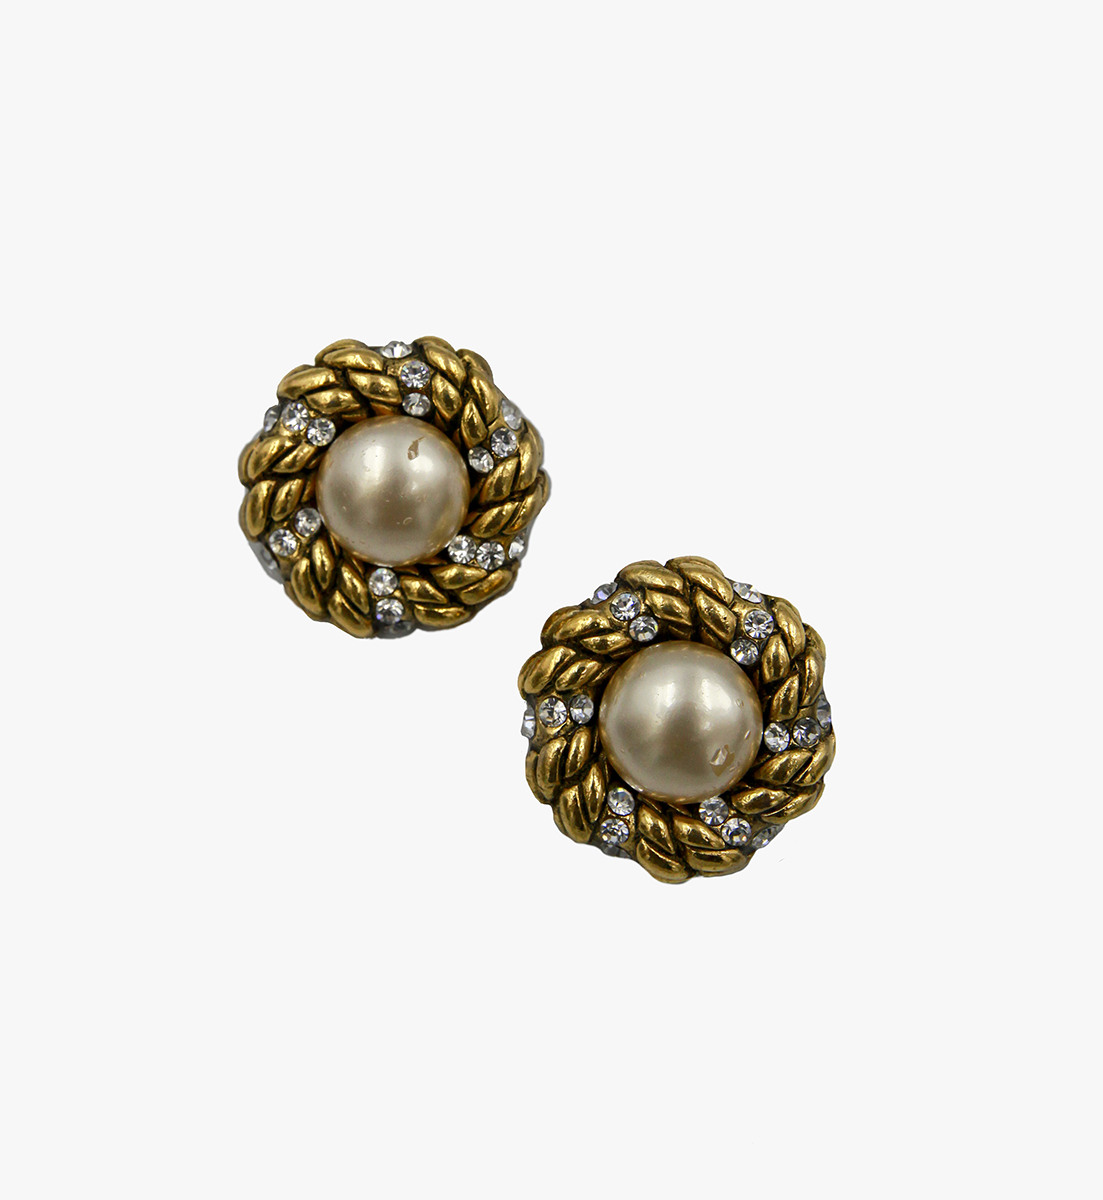 Chanel Vintage Faux Pearl&Crystal Clip-On Earrings,1984-1